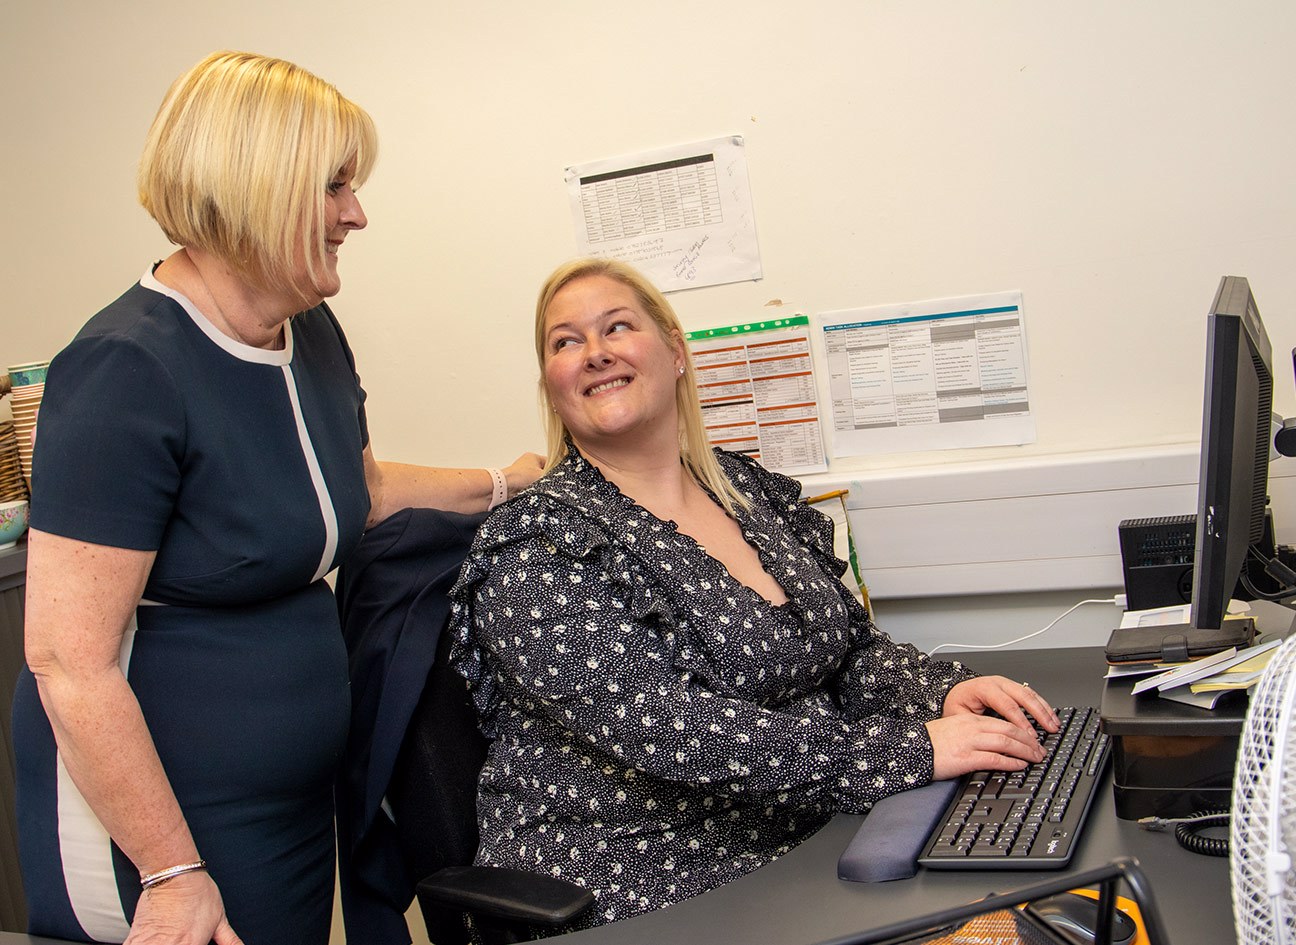 Healthcare apprentice smiling at employer